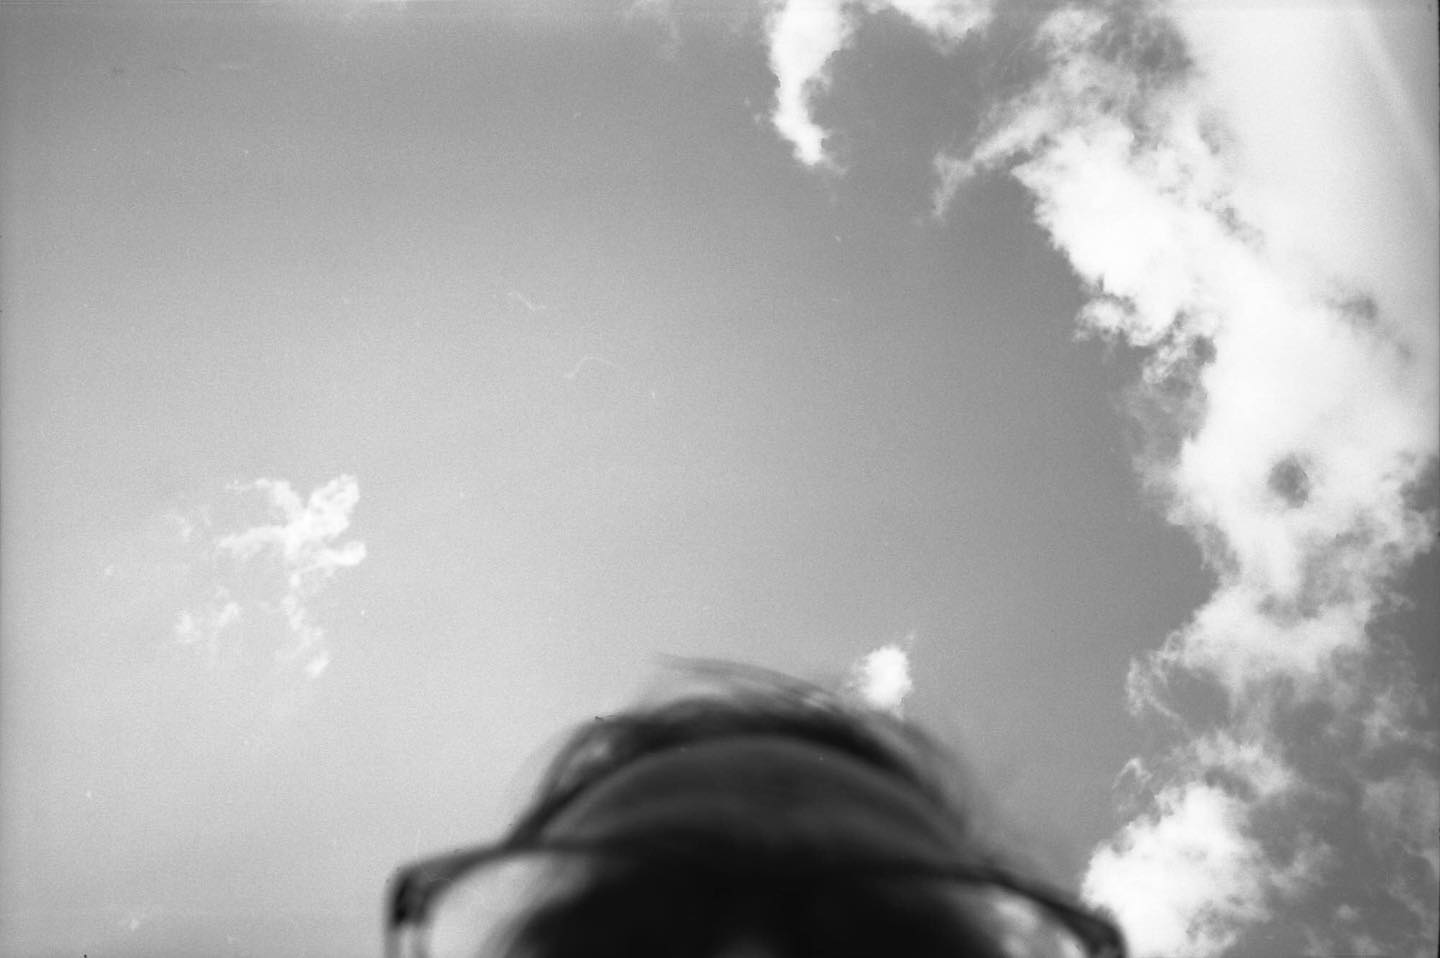 Accidental selfie. One thing I am not absolutely crazy about with my new-to-me #olympusxa is how easy it is to trigger the shutter. Like when Iâm trying to read something on the camera. And I wind up taking a picture by accident. Like this. Maybe itâs not so bad after all.... Shot on @filmferrania #p30film, developed in the @arsimago Lab-Box. #film #filmphotography #filmphotographic #shootfilmstaybroke